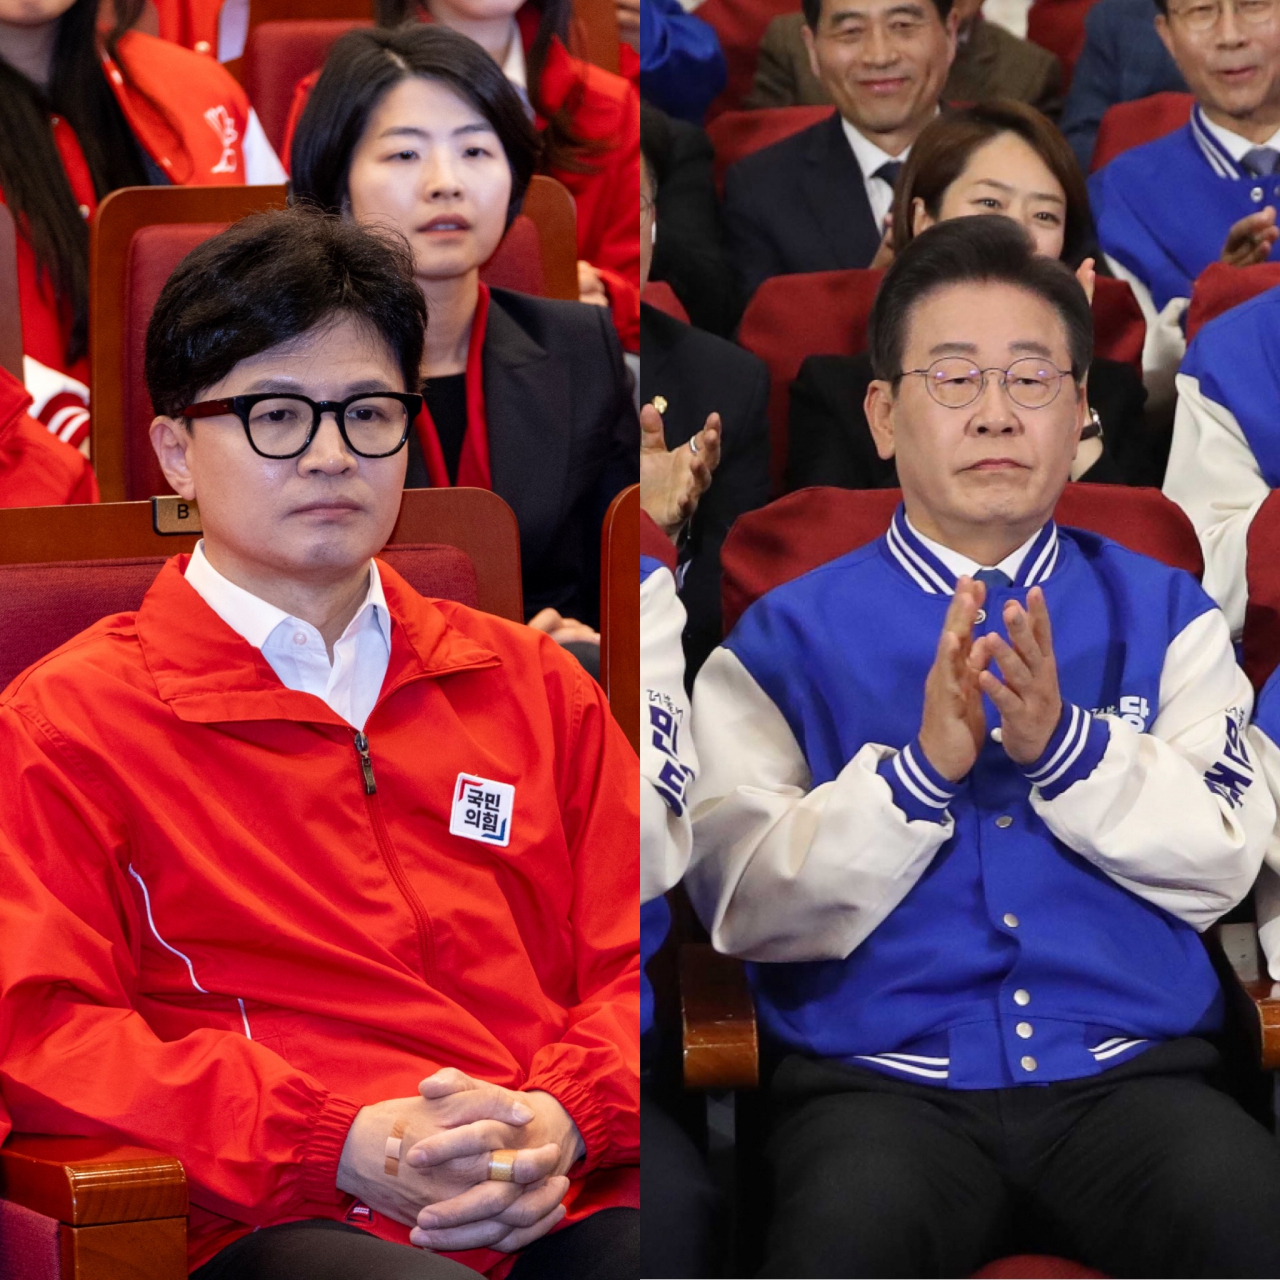 This combined photo shows officials of the main opposition Democratic Party (L), including it leader Lee Jae-myung, clap at the National Assembly in Seoul on Wednesday. In contrast, officials of the ruling People Power Party, including its interim leader Han Dong-hoon, look gloomy at the National Assembly in Seoul on Wednesday. (Yonhap)